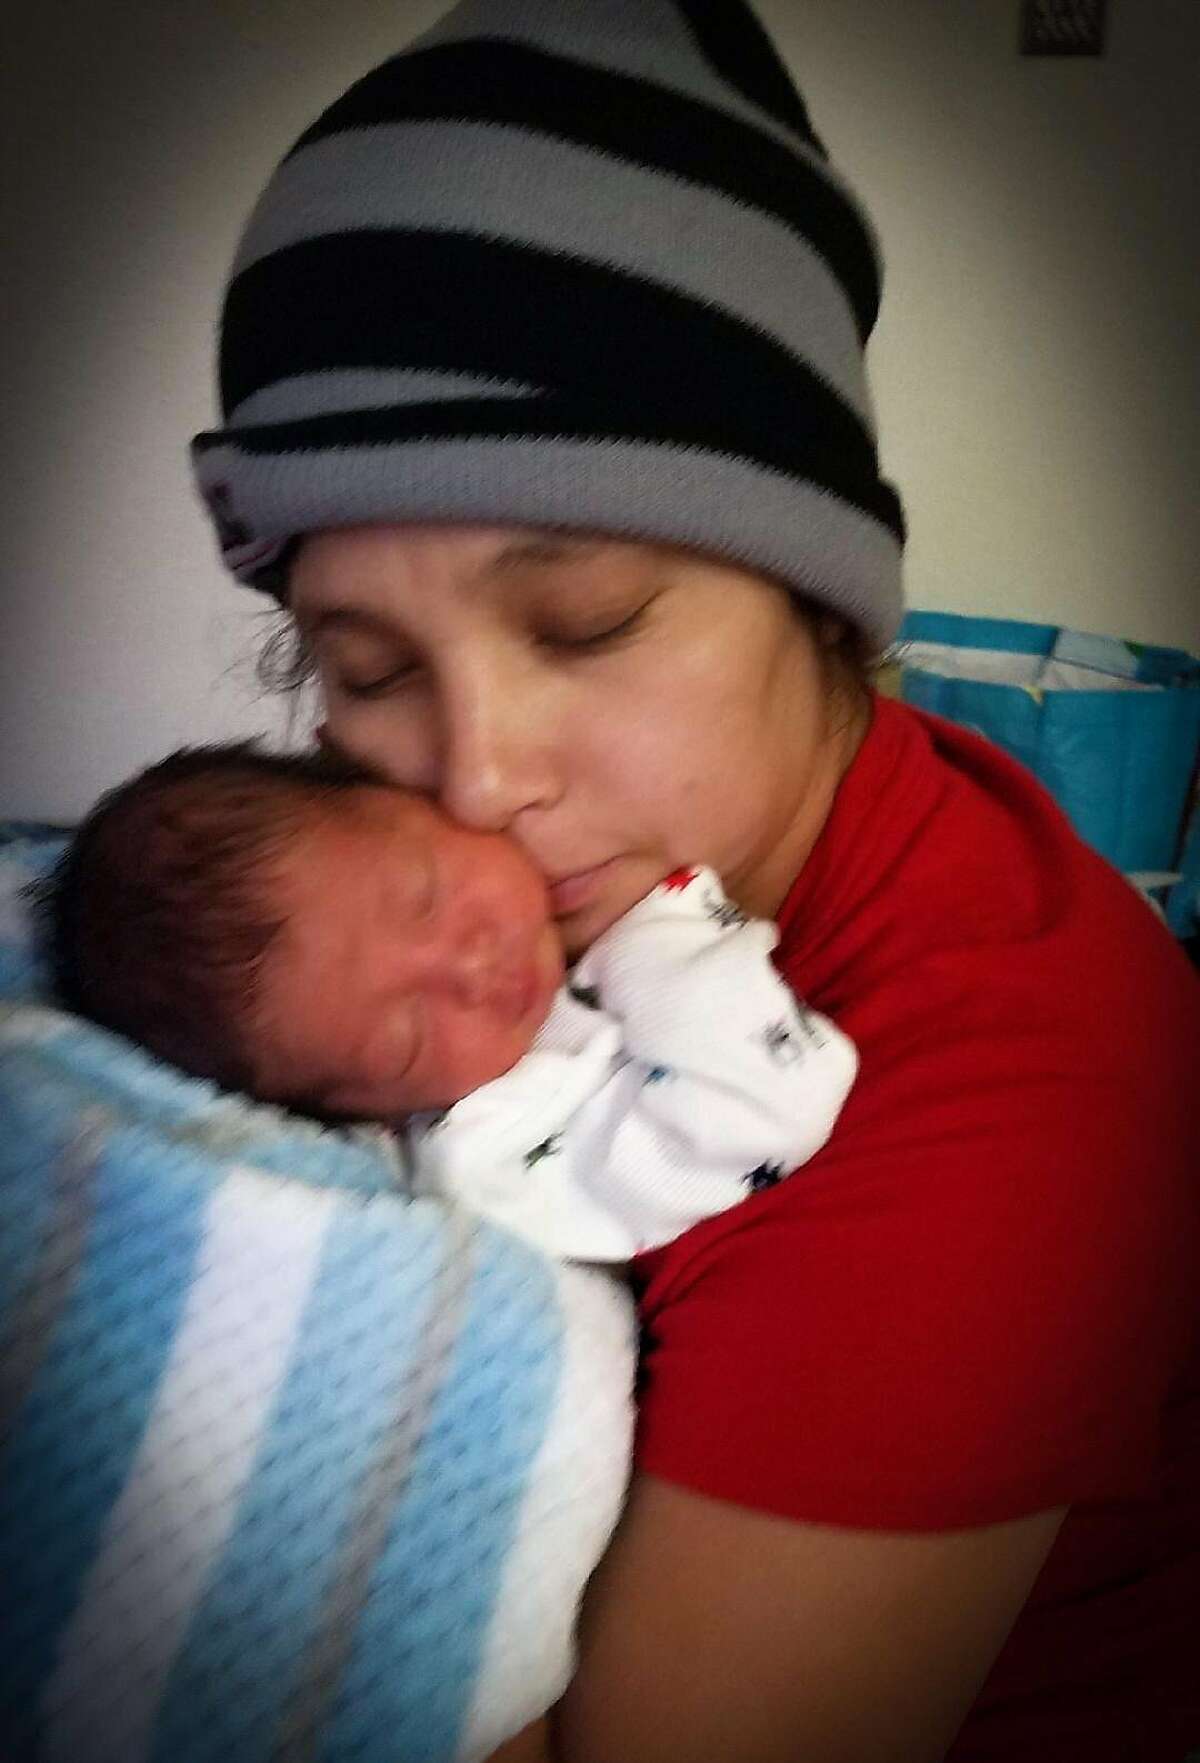 Aida Andrade-Amaya was granted asylum Monday after being detained for six months. She was arrested by ICE in November, two months after giving birth to her second child.